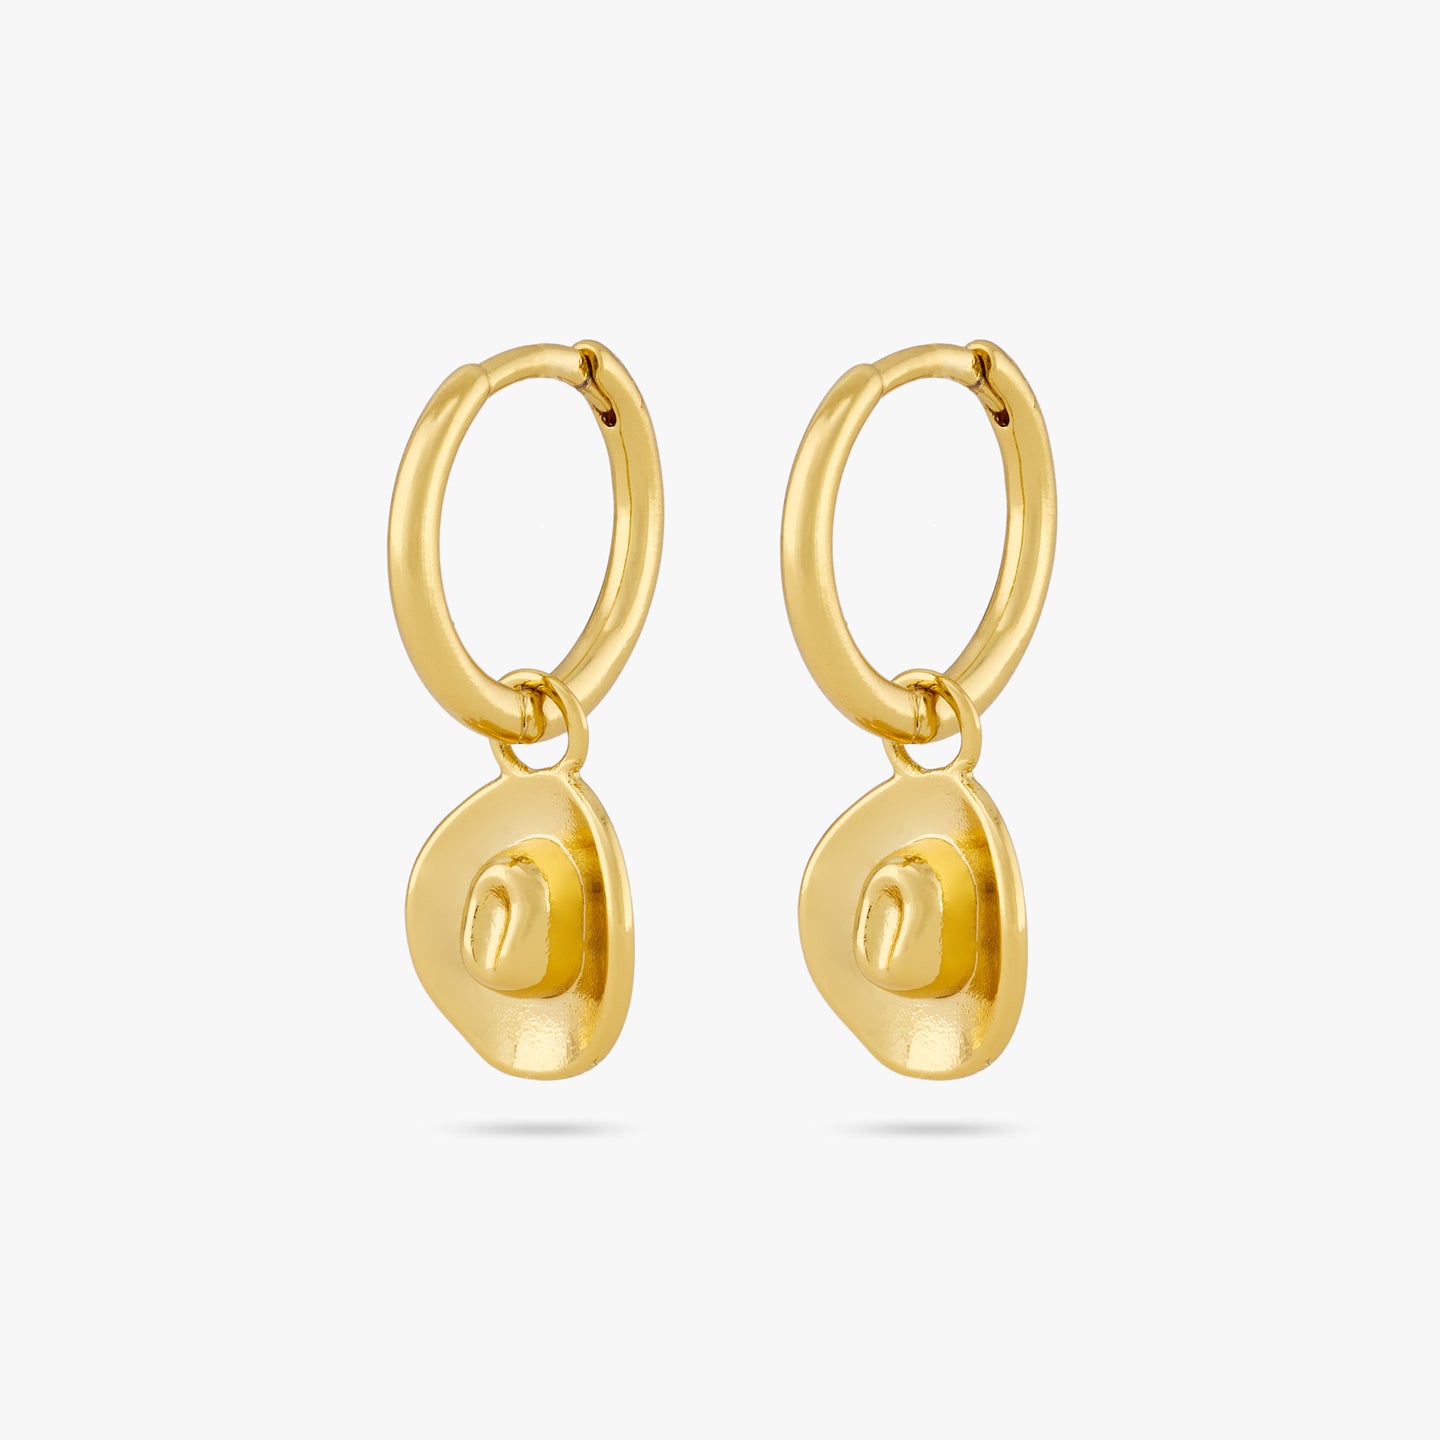 A pair of small gold huggies with a cowboy hat charm on an ear. [pair] color:null|gold